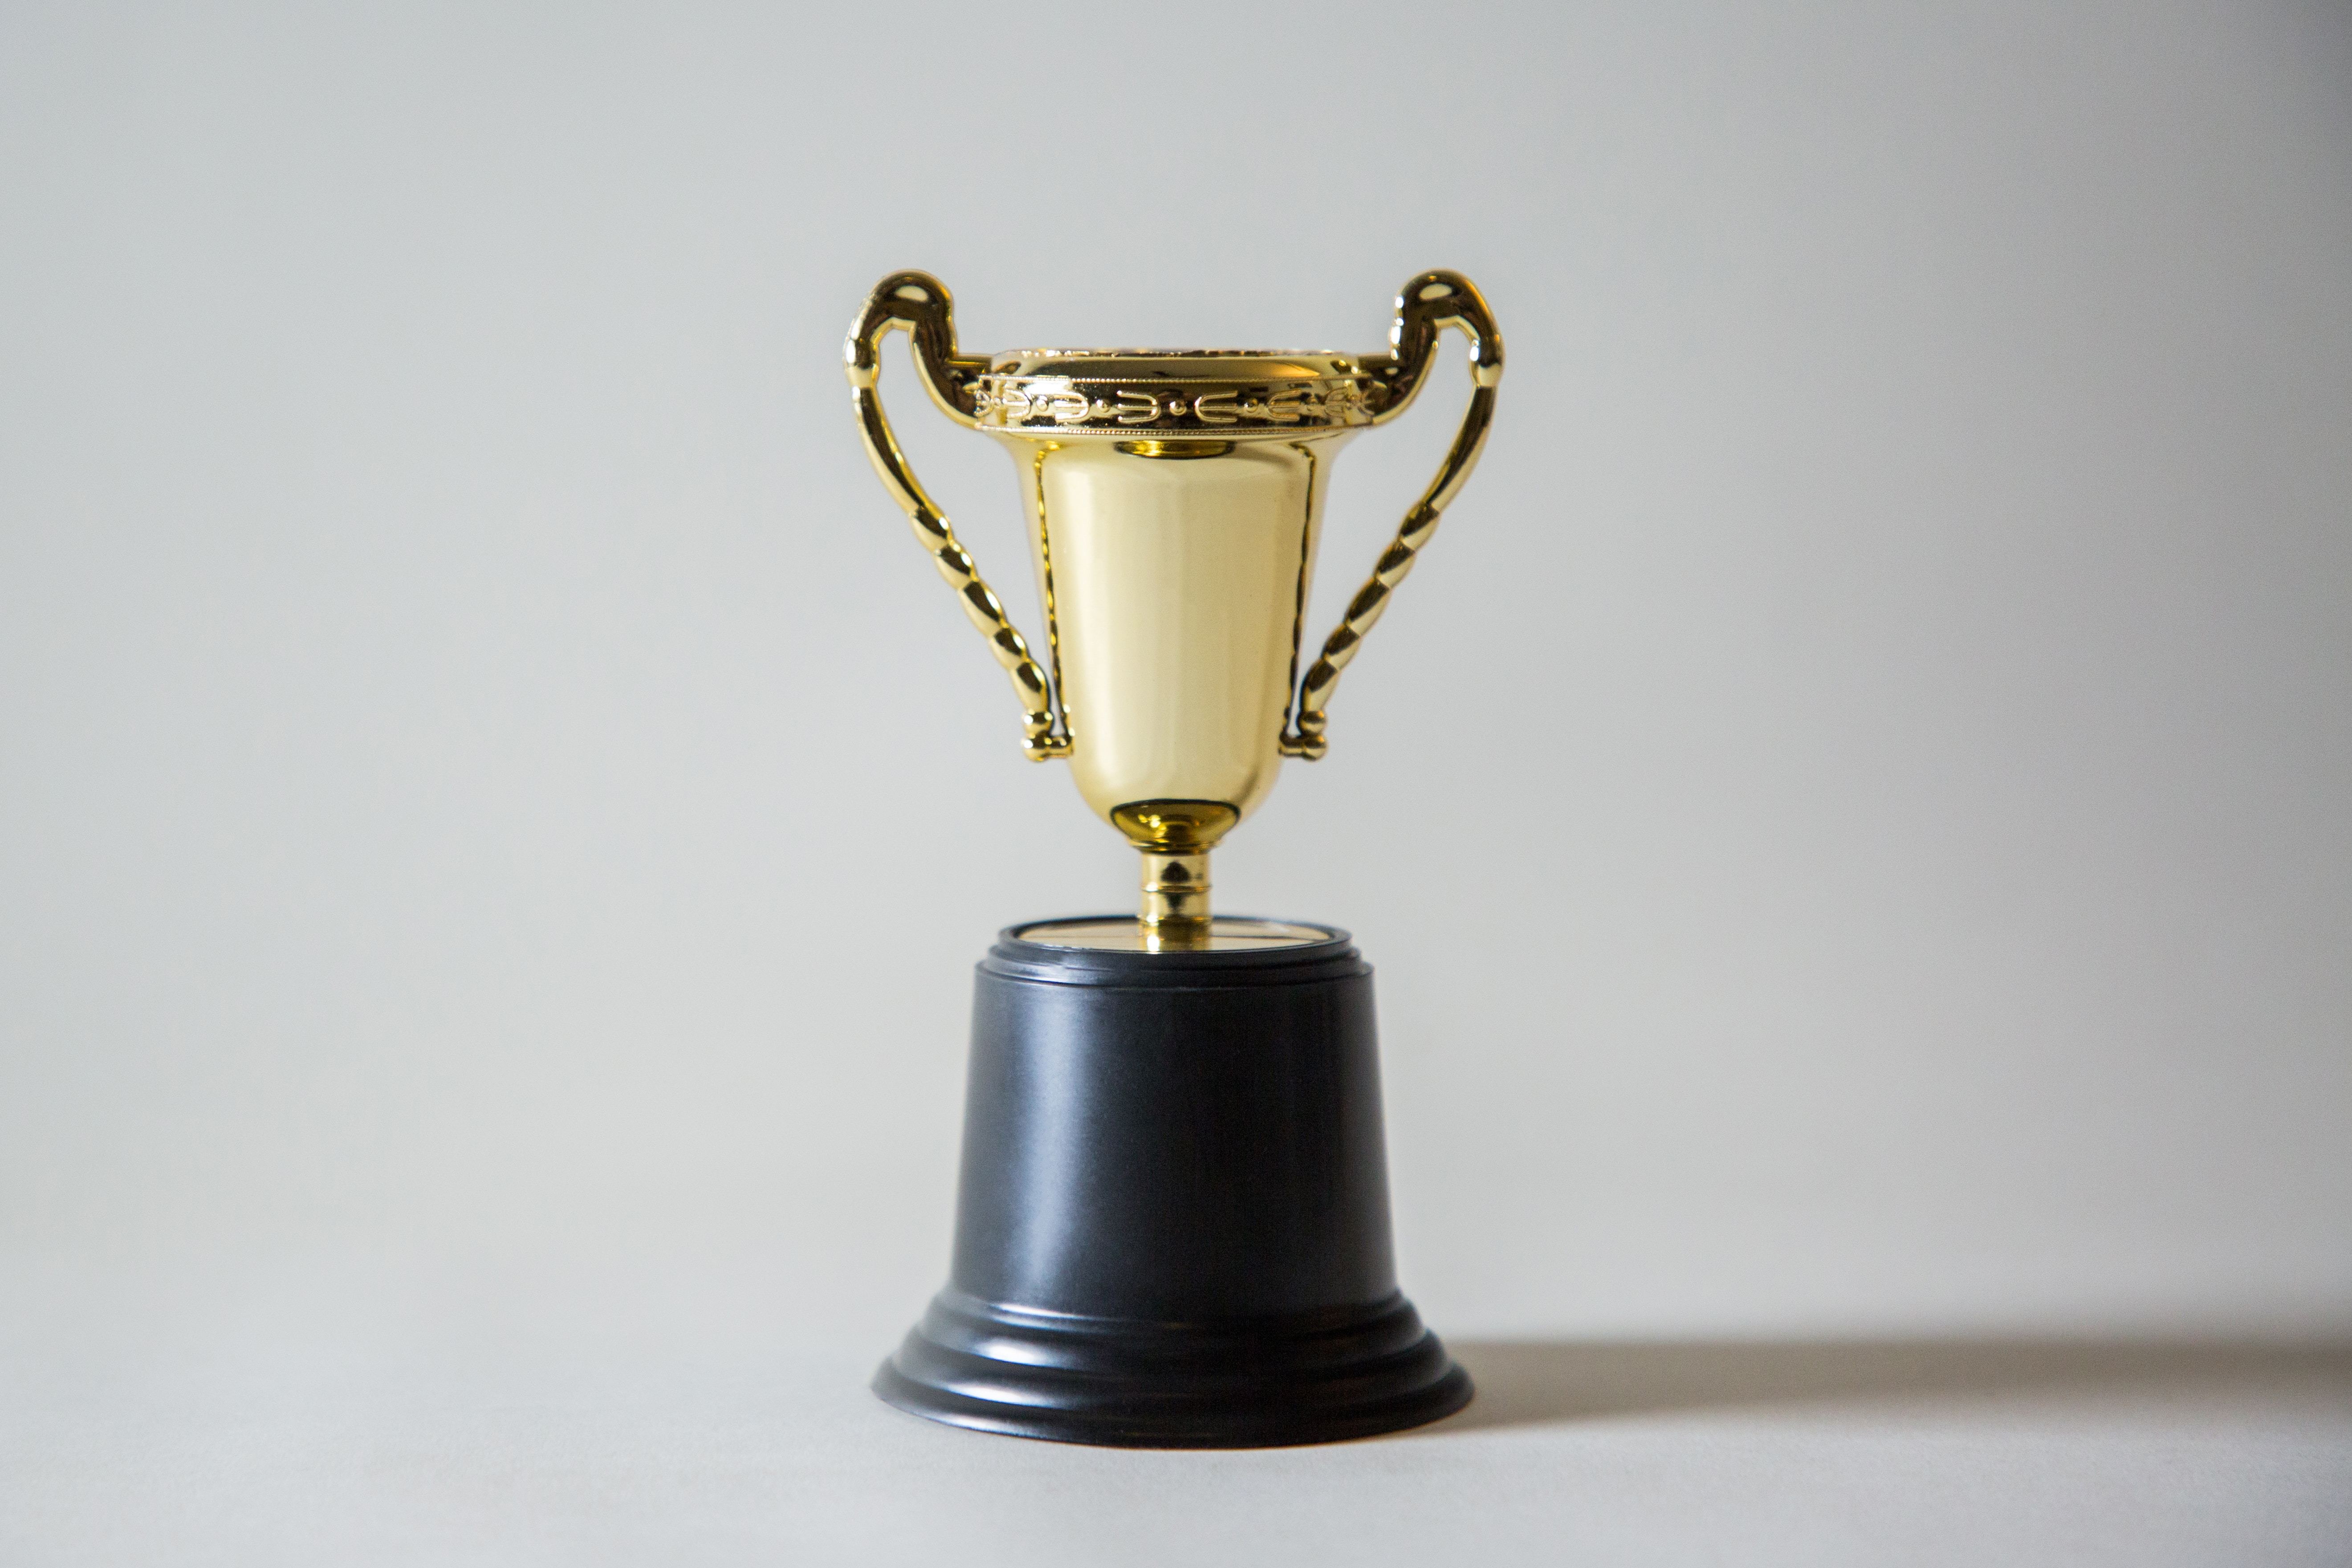 2019 Tufts-CEVR’s Cost-Effectiveness Analysis Paper of the Year Award